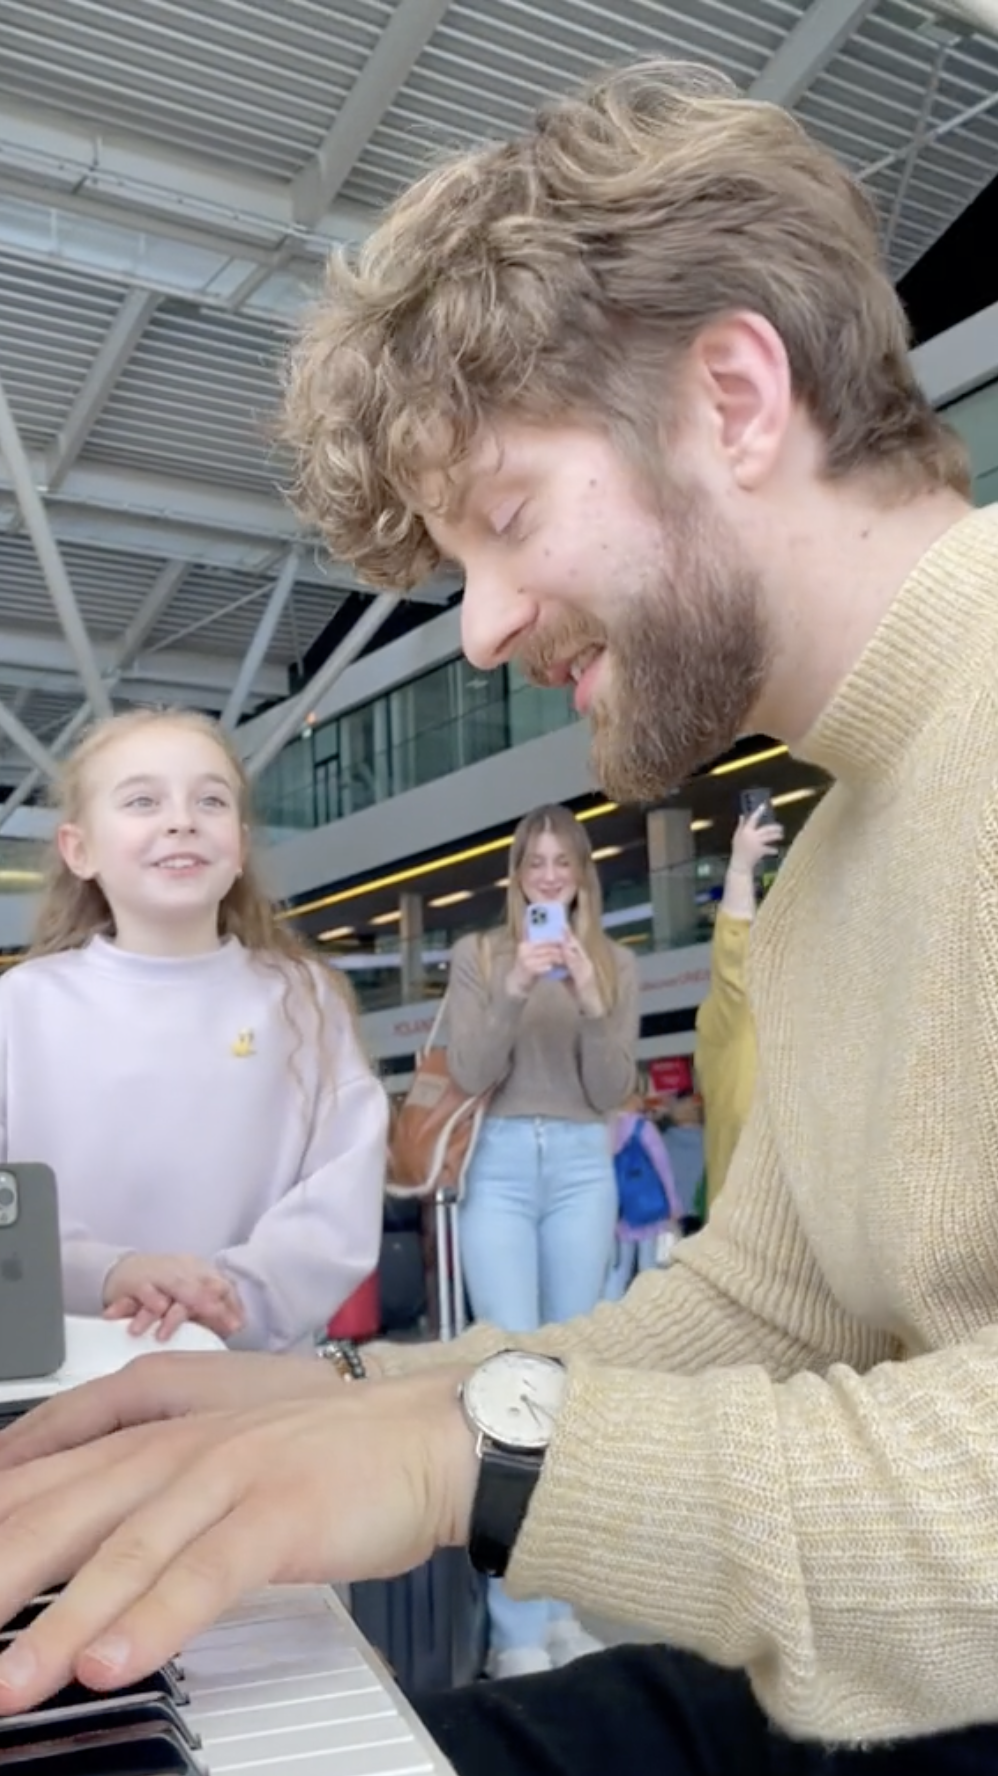 This video will make you cry: a little refugee sings Let it go at a Polish airport in Ukrainian, going viral